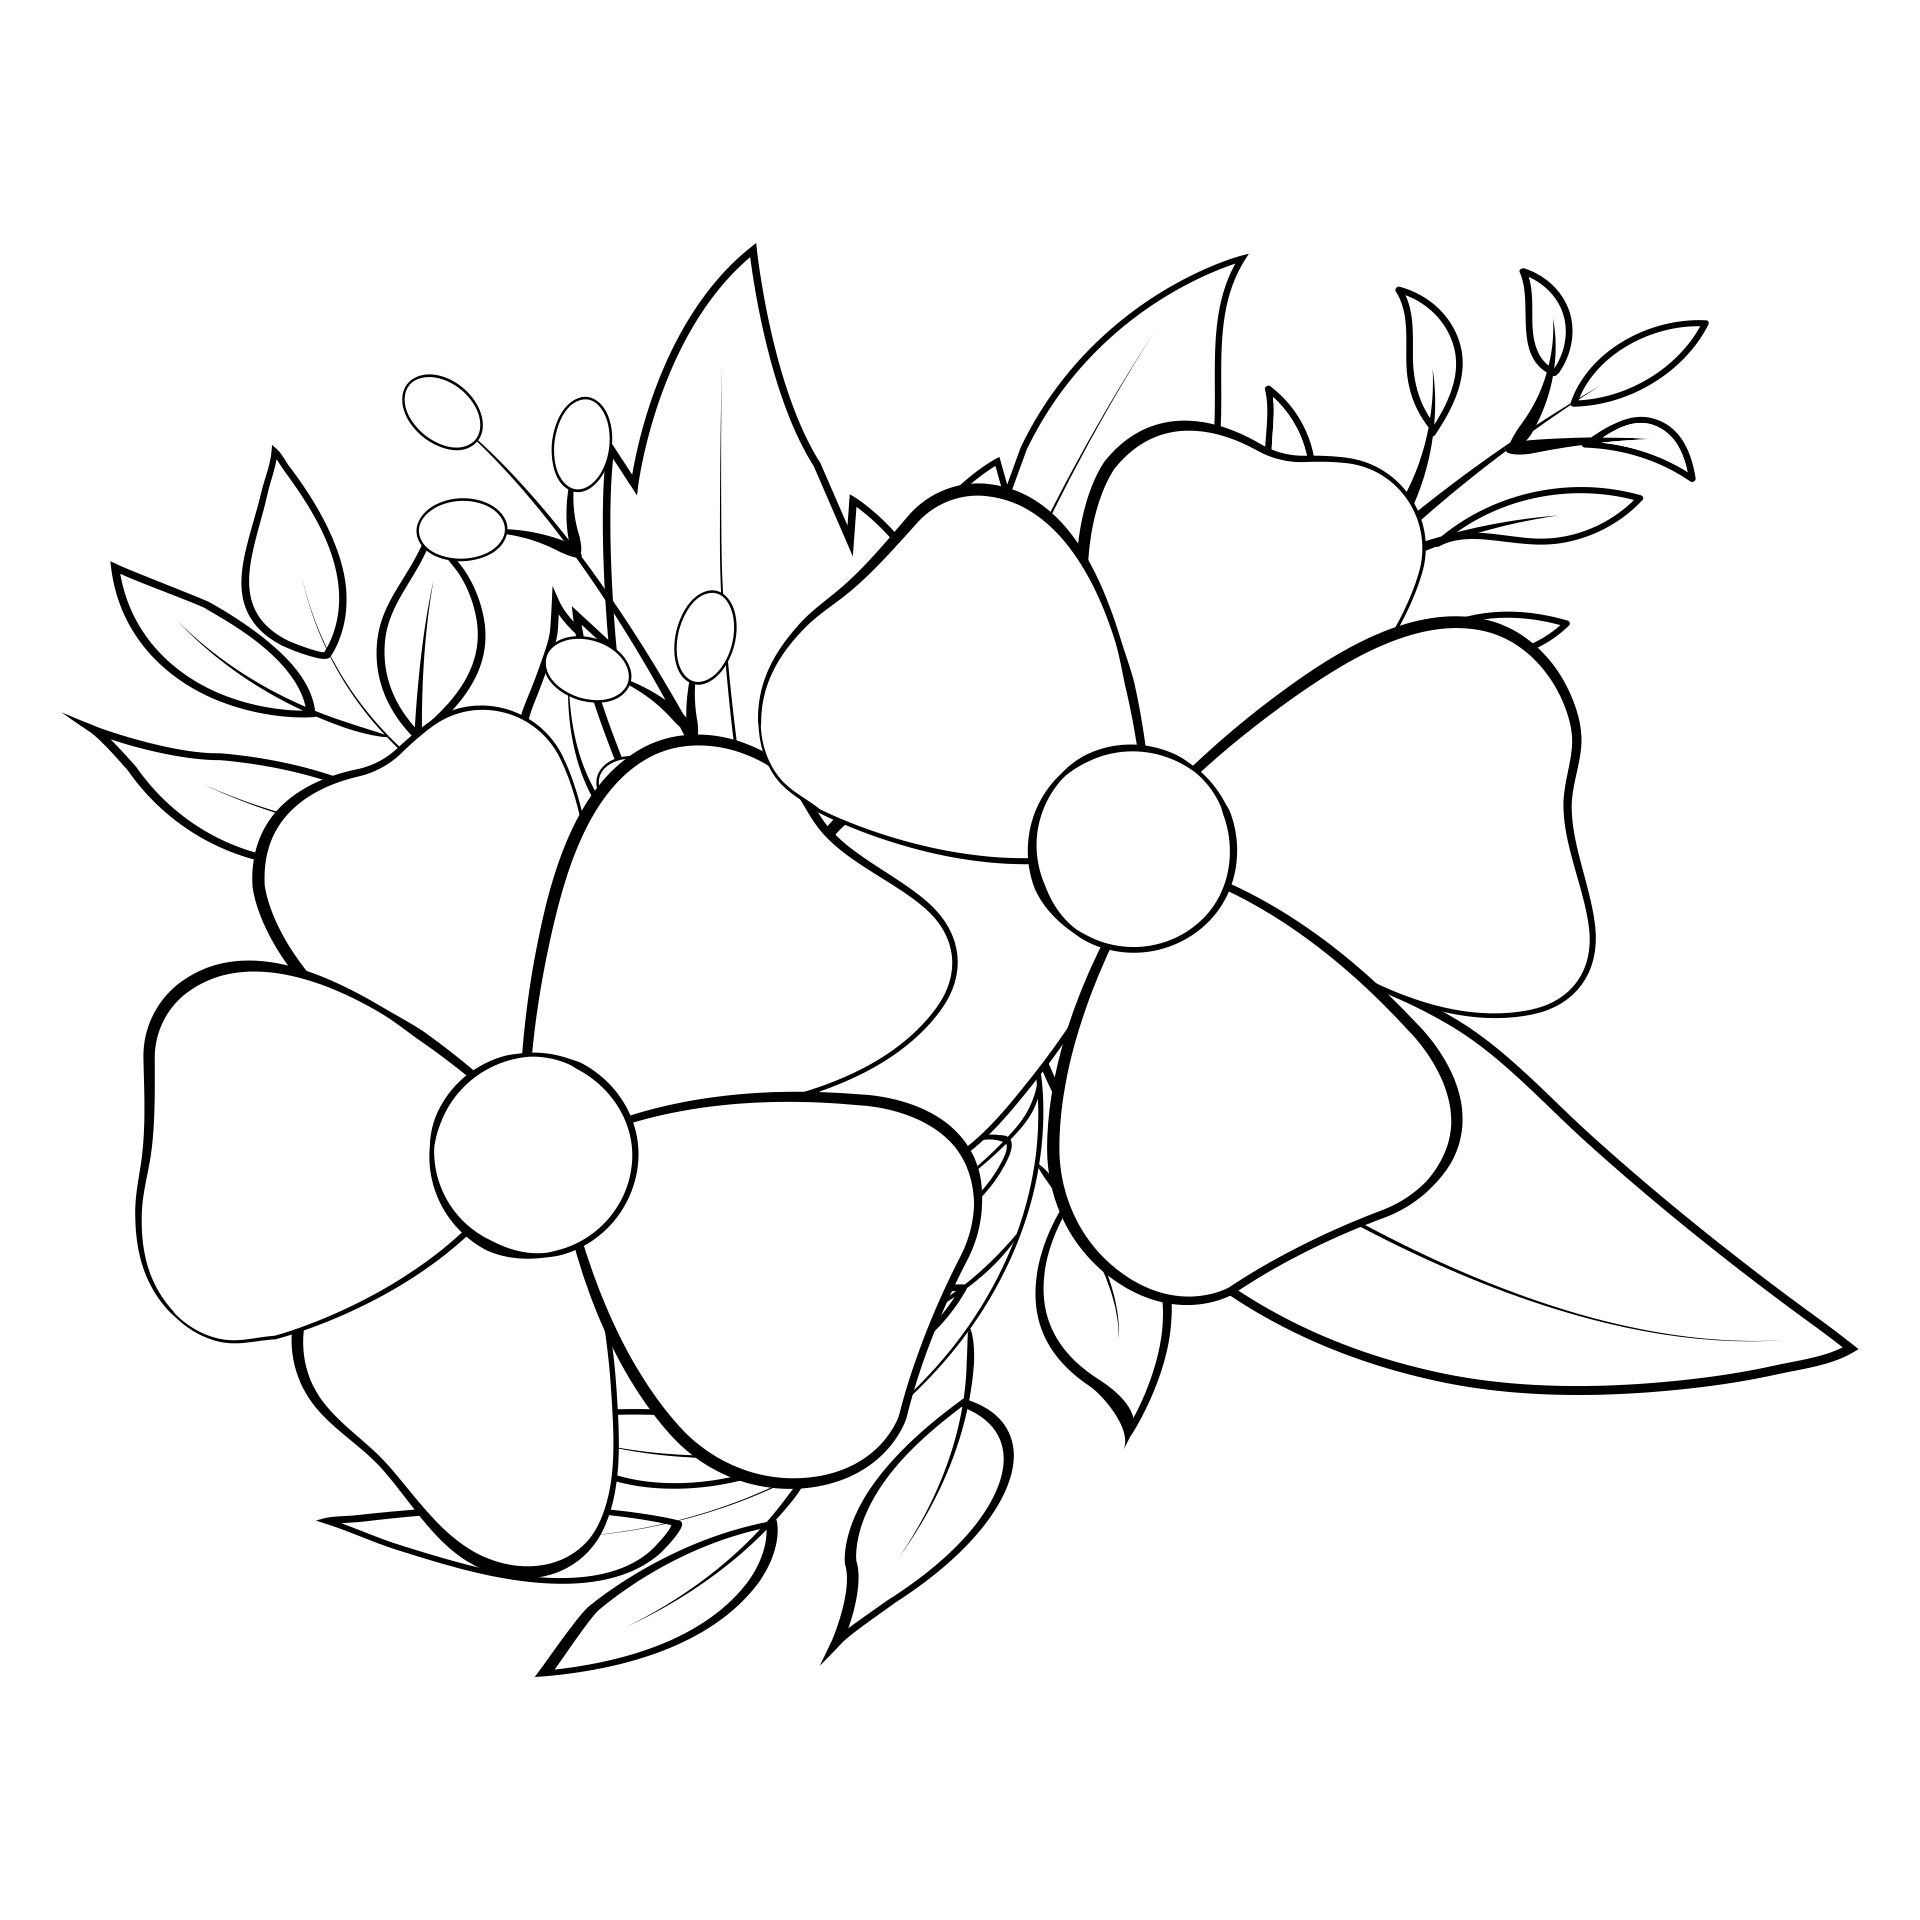  Printable Flower Embroidery Patterns